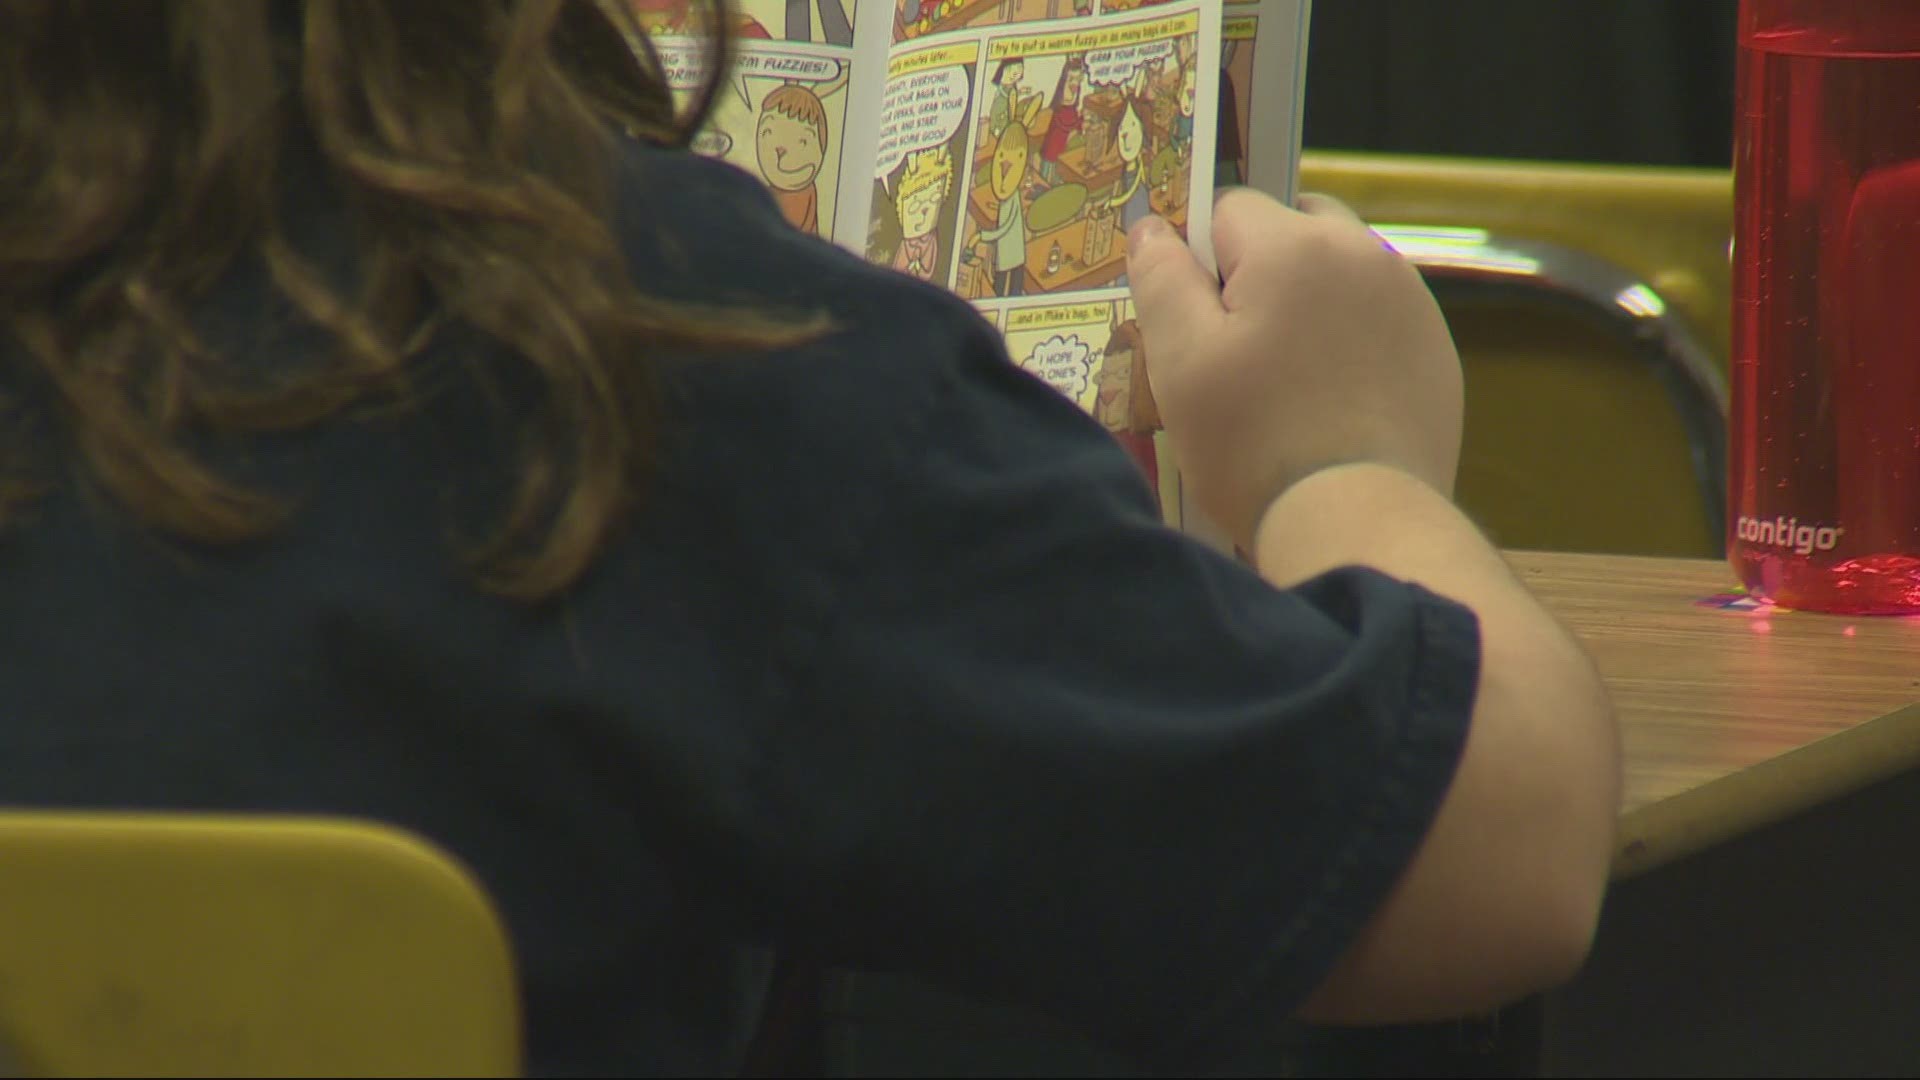 Oregon’s Republican lawmakers announced a new bill requiring in-person learning next school year. Tim Gordon reports.